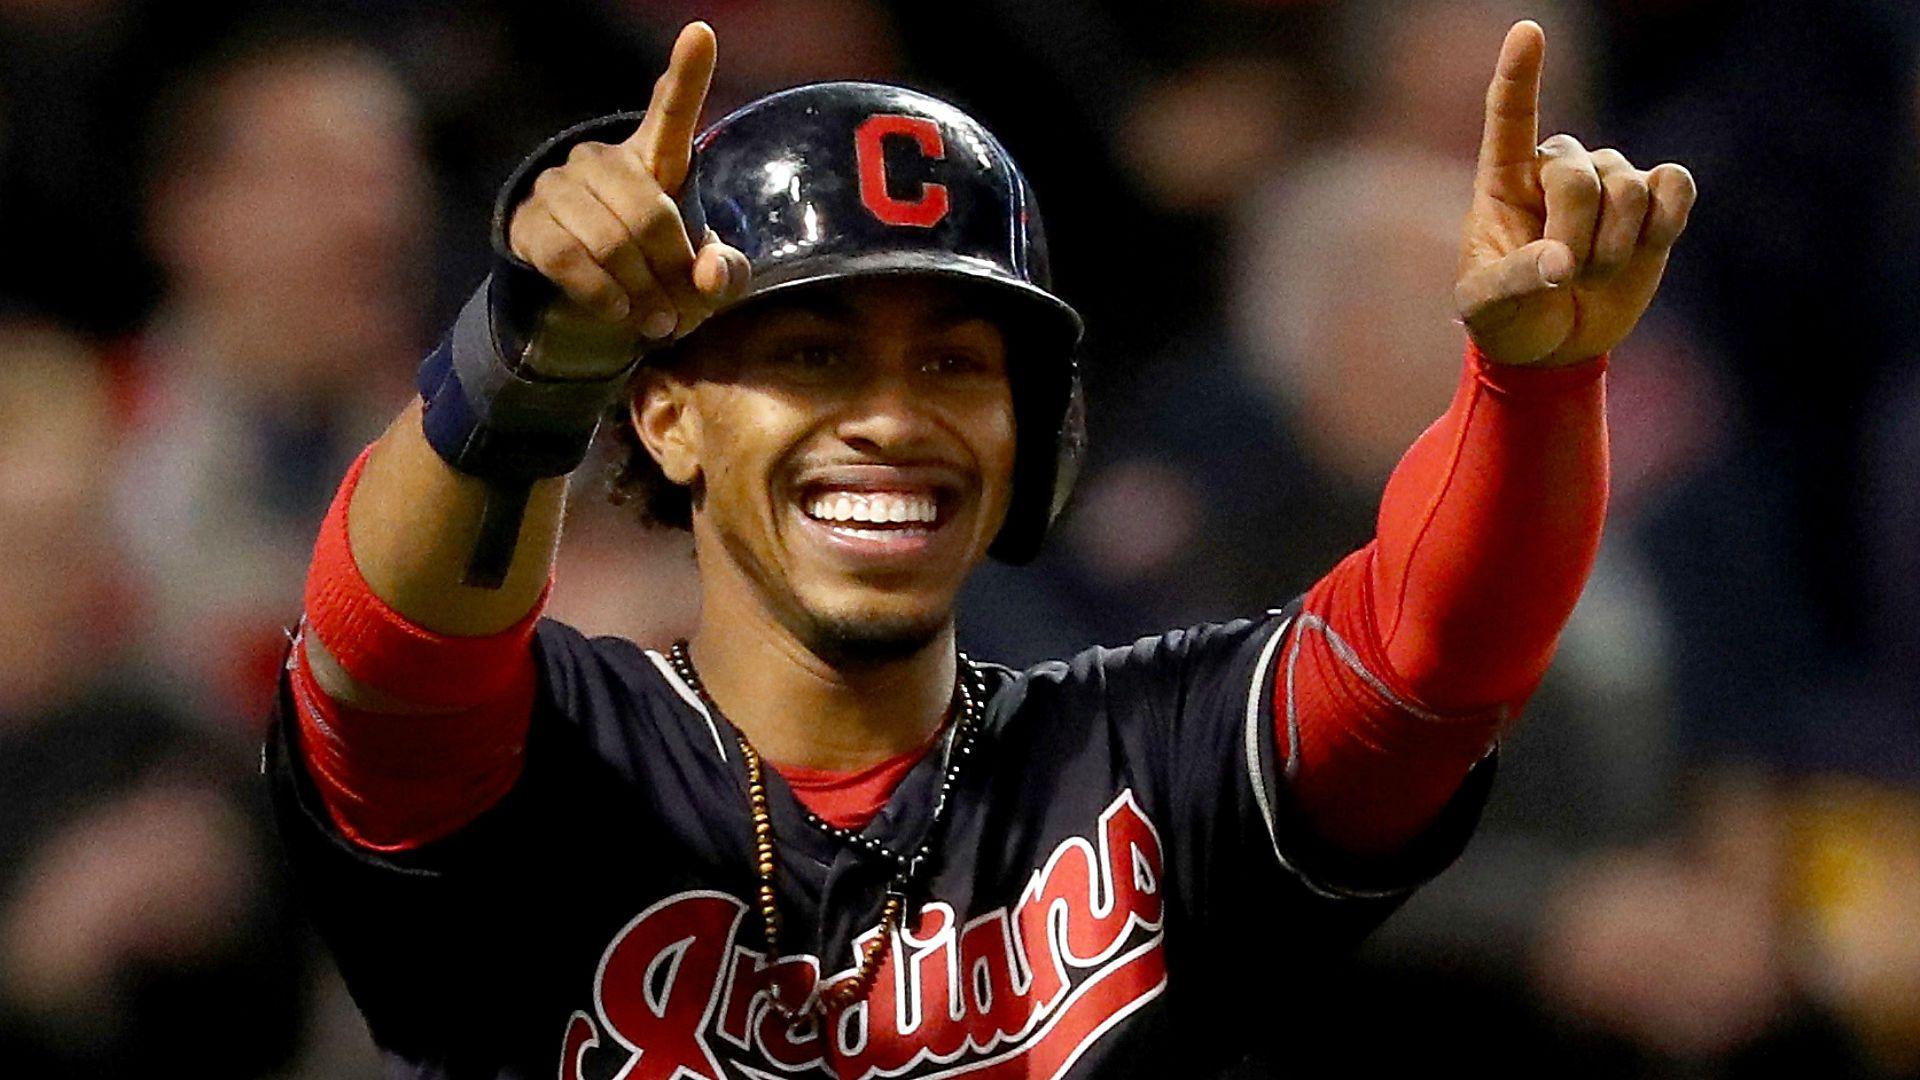 Frankie Lindor's Blue Hair: The Impact of the Hairstyle on Youth Baseball Players - wide 7